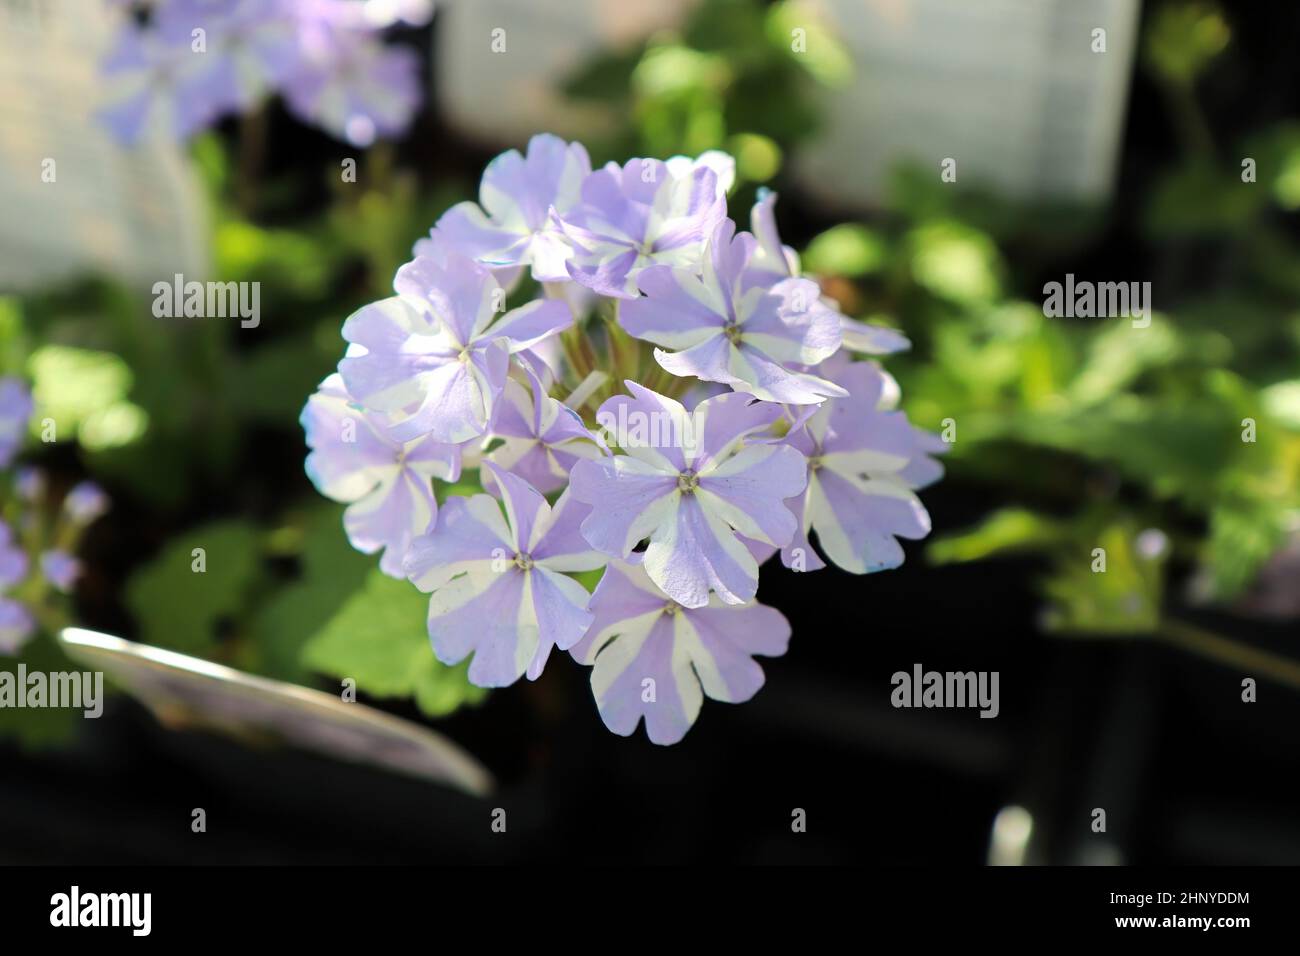 A cluster of purple and white striped verbena flowers. Stock Photo